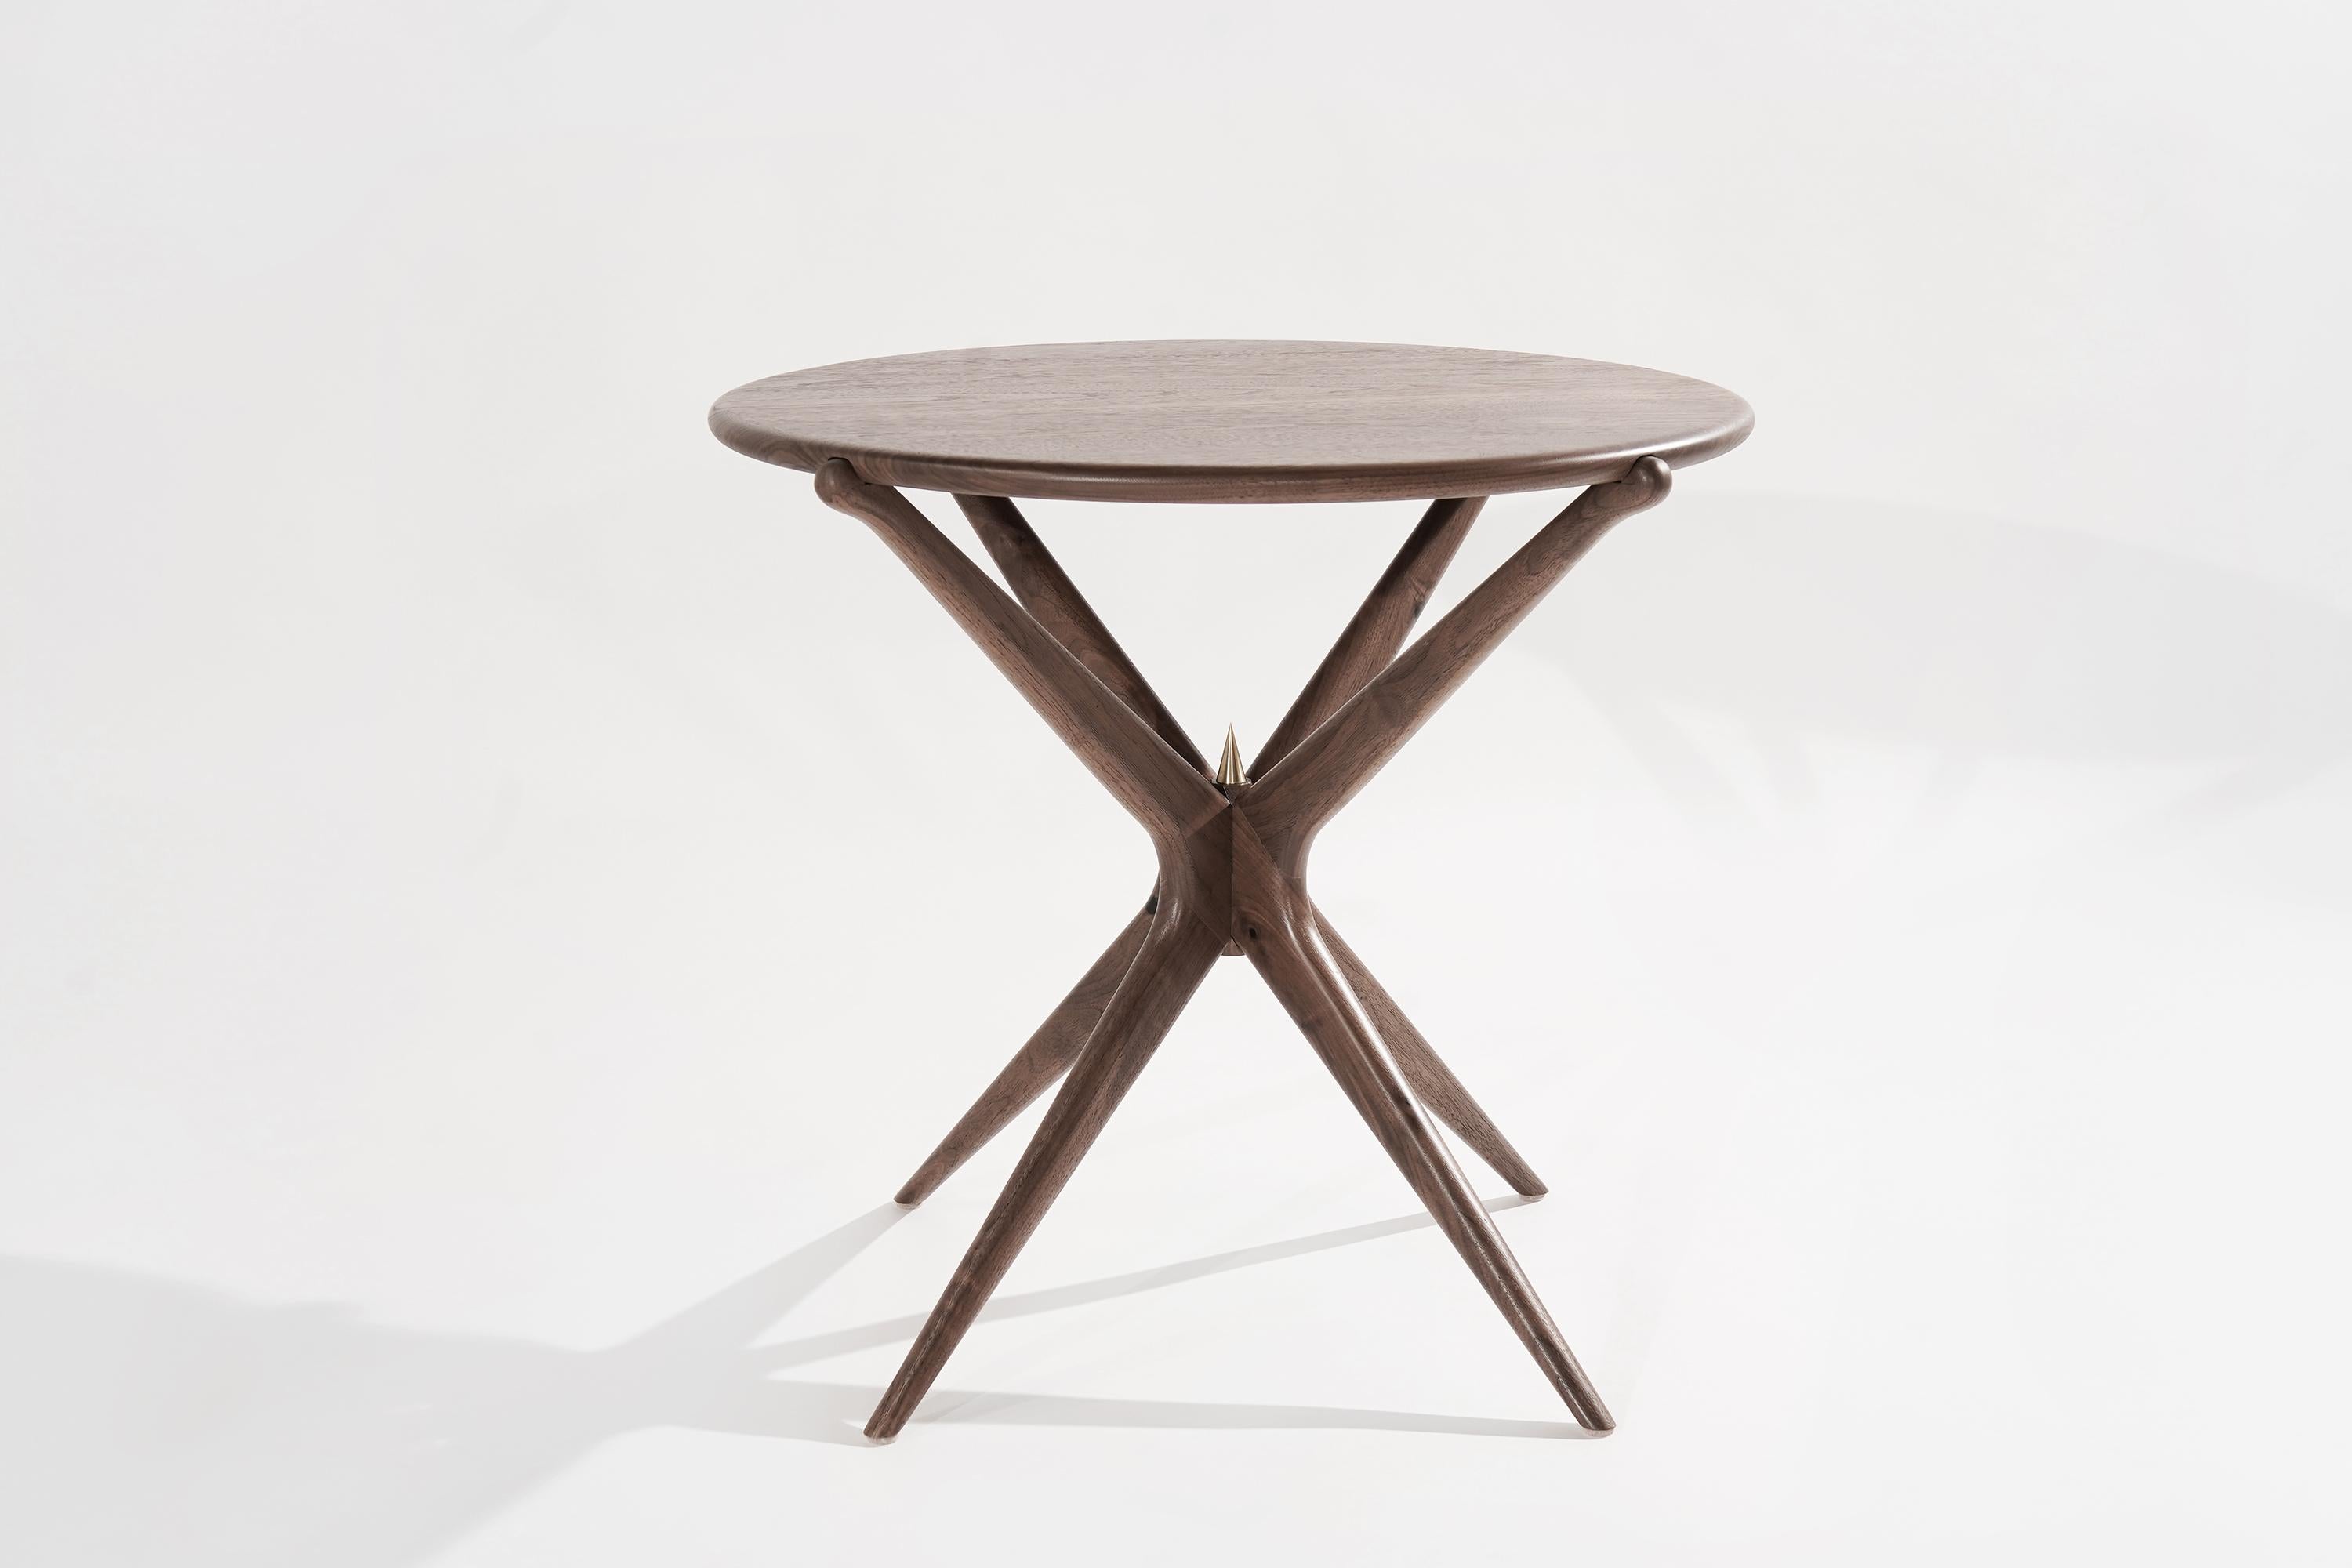 Hand-Crafted Walnut Gazelle Occasional Table by Stamford Modern